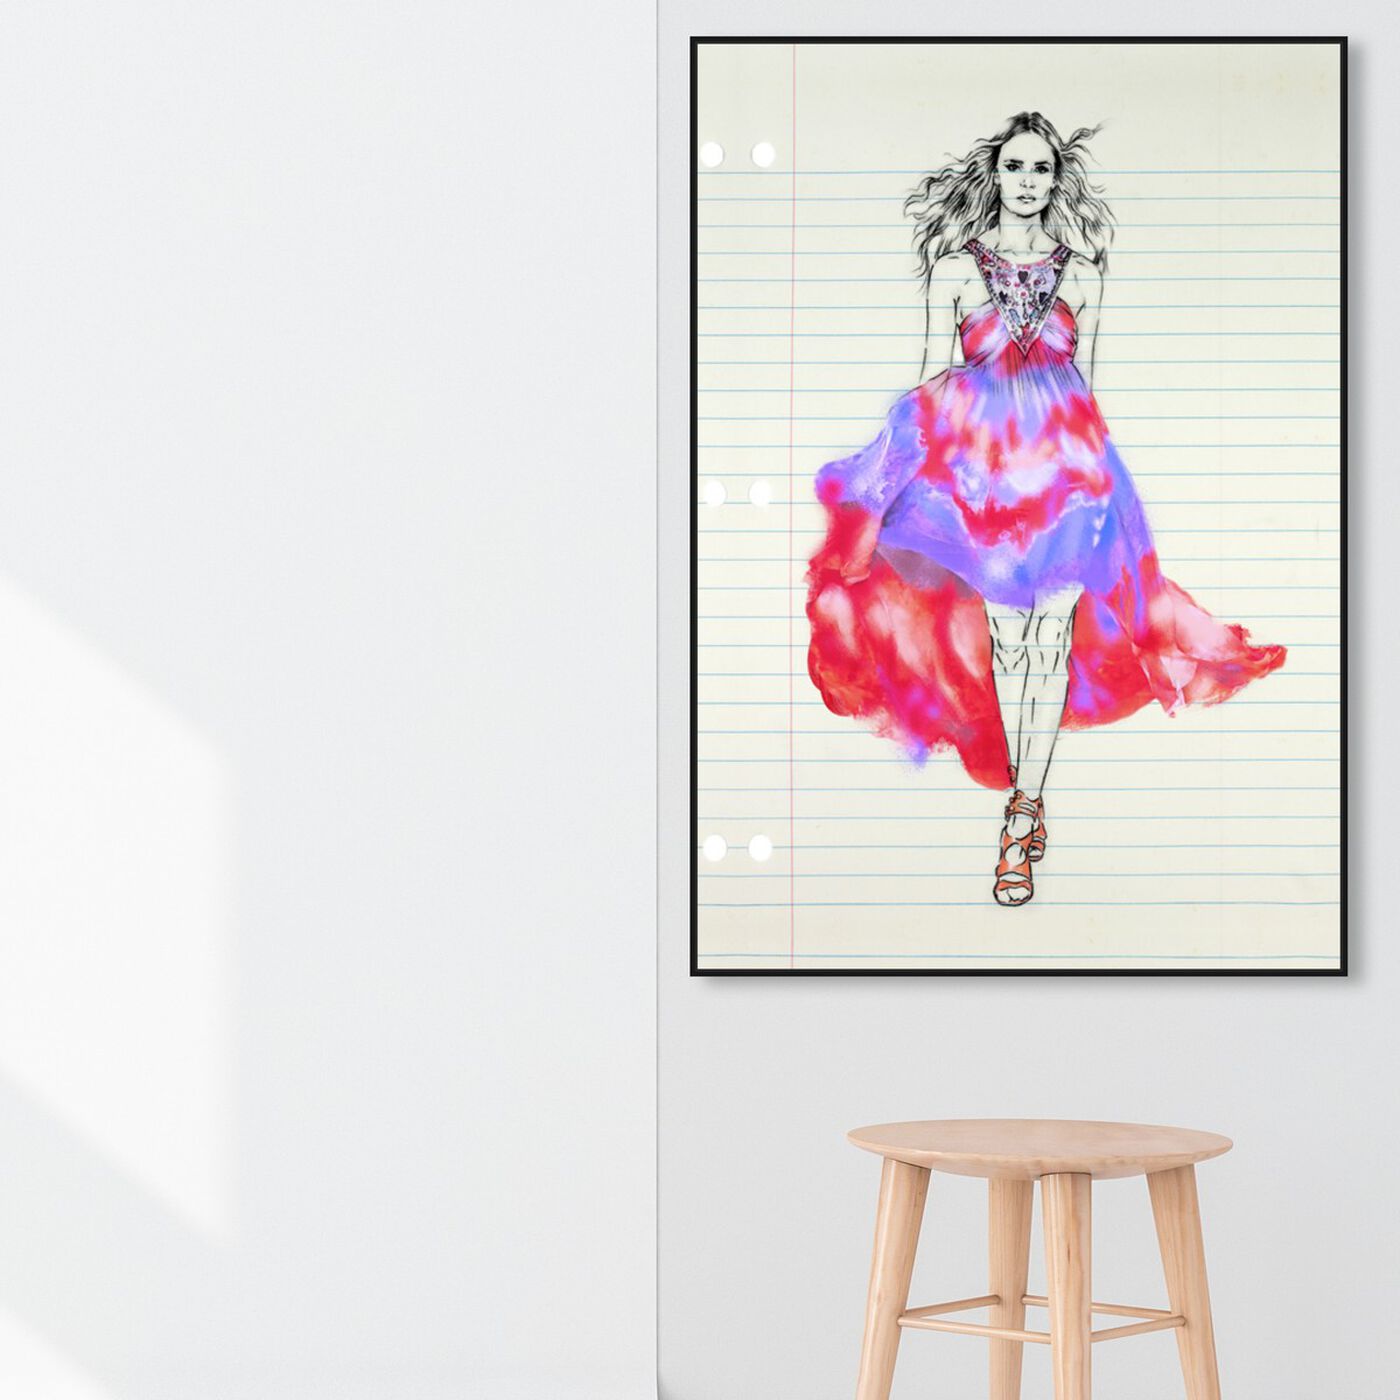 Hanging view of Fashion Illustration 1 featuring fashion and glam and dress art.